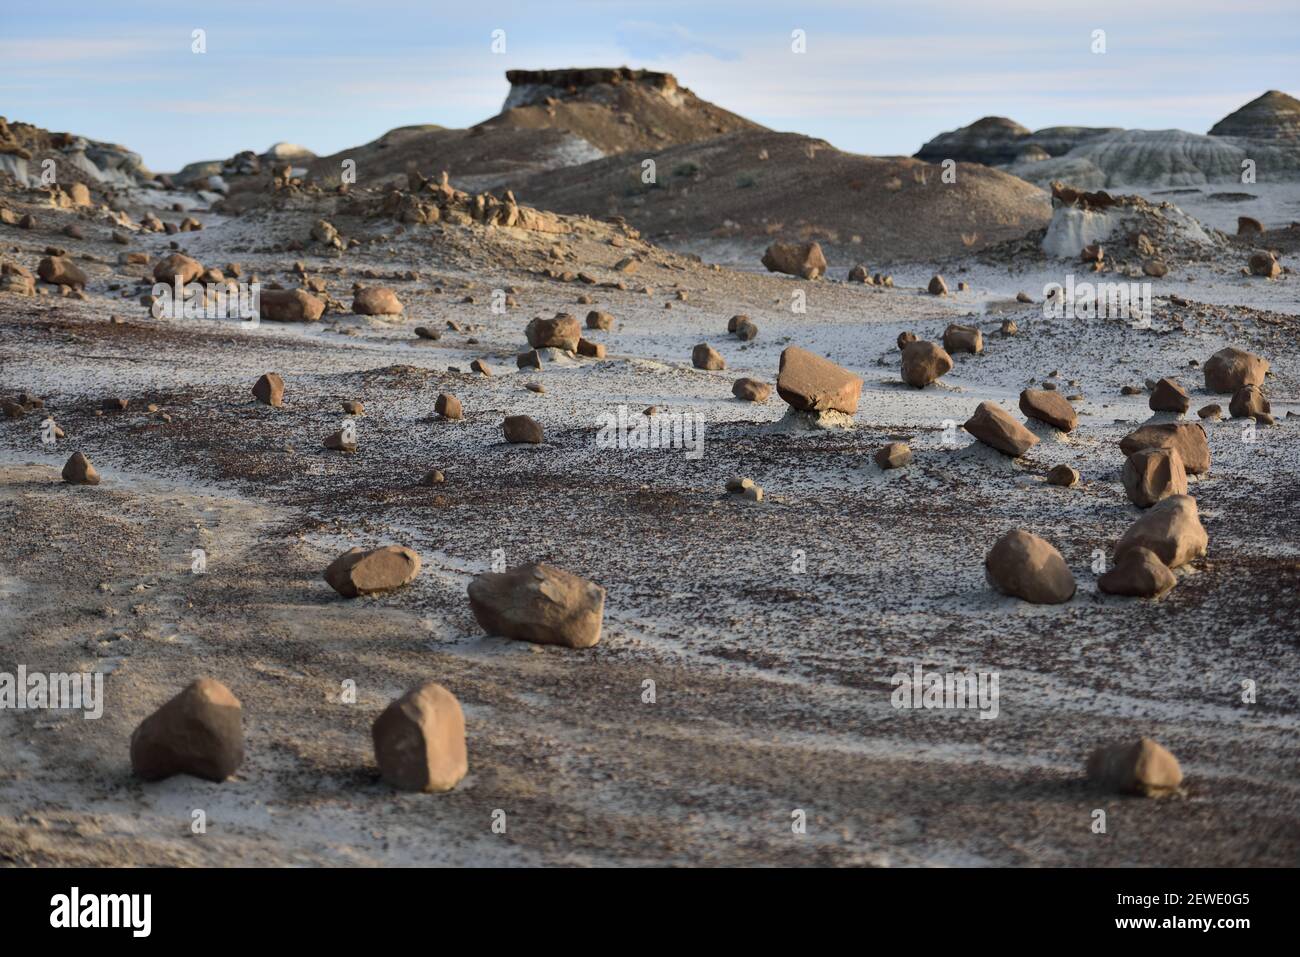 A rocky area of the Bisti/De-Na-Zin Wilderness in New Mexico pictured on April 9, 2016. The area was once a delta that lay to the west of the Western Interior Seaway 70 million years ago, and the badlands  were formed by the erosion of the sandy Ojo Alamo Formation. (Photo by Alex Milan Tracy) *** Please Use Credit from Credit Field *** Stock Photo